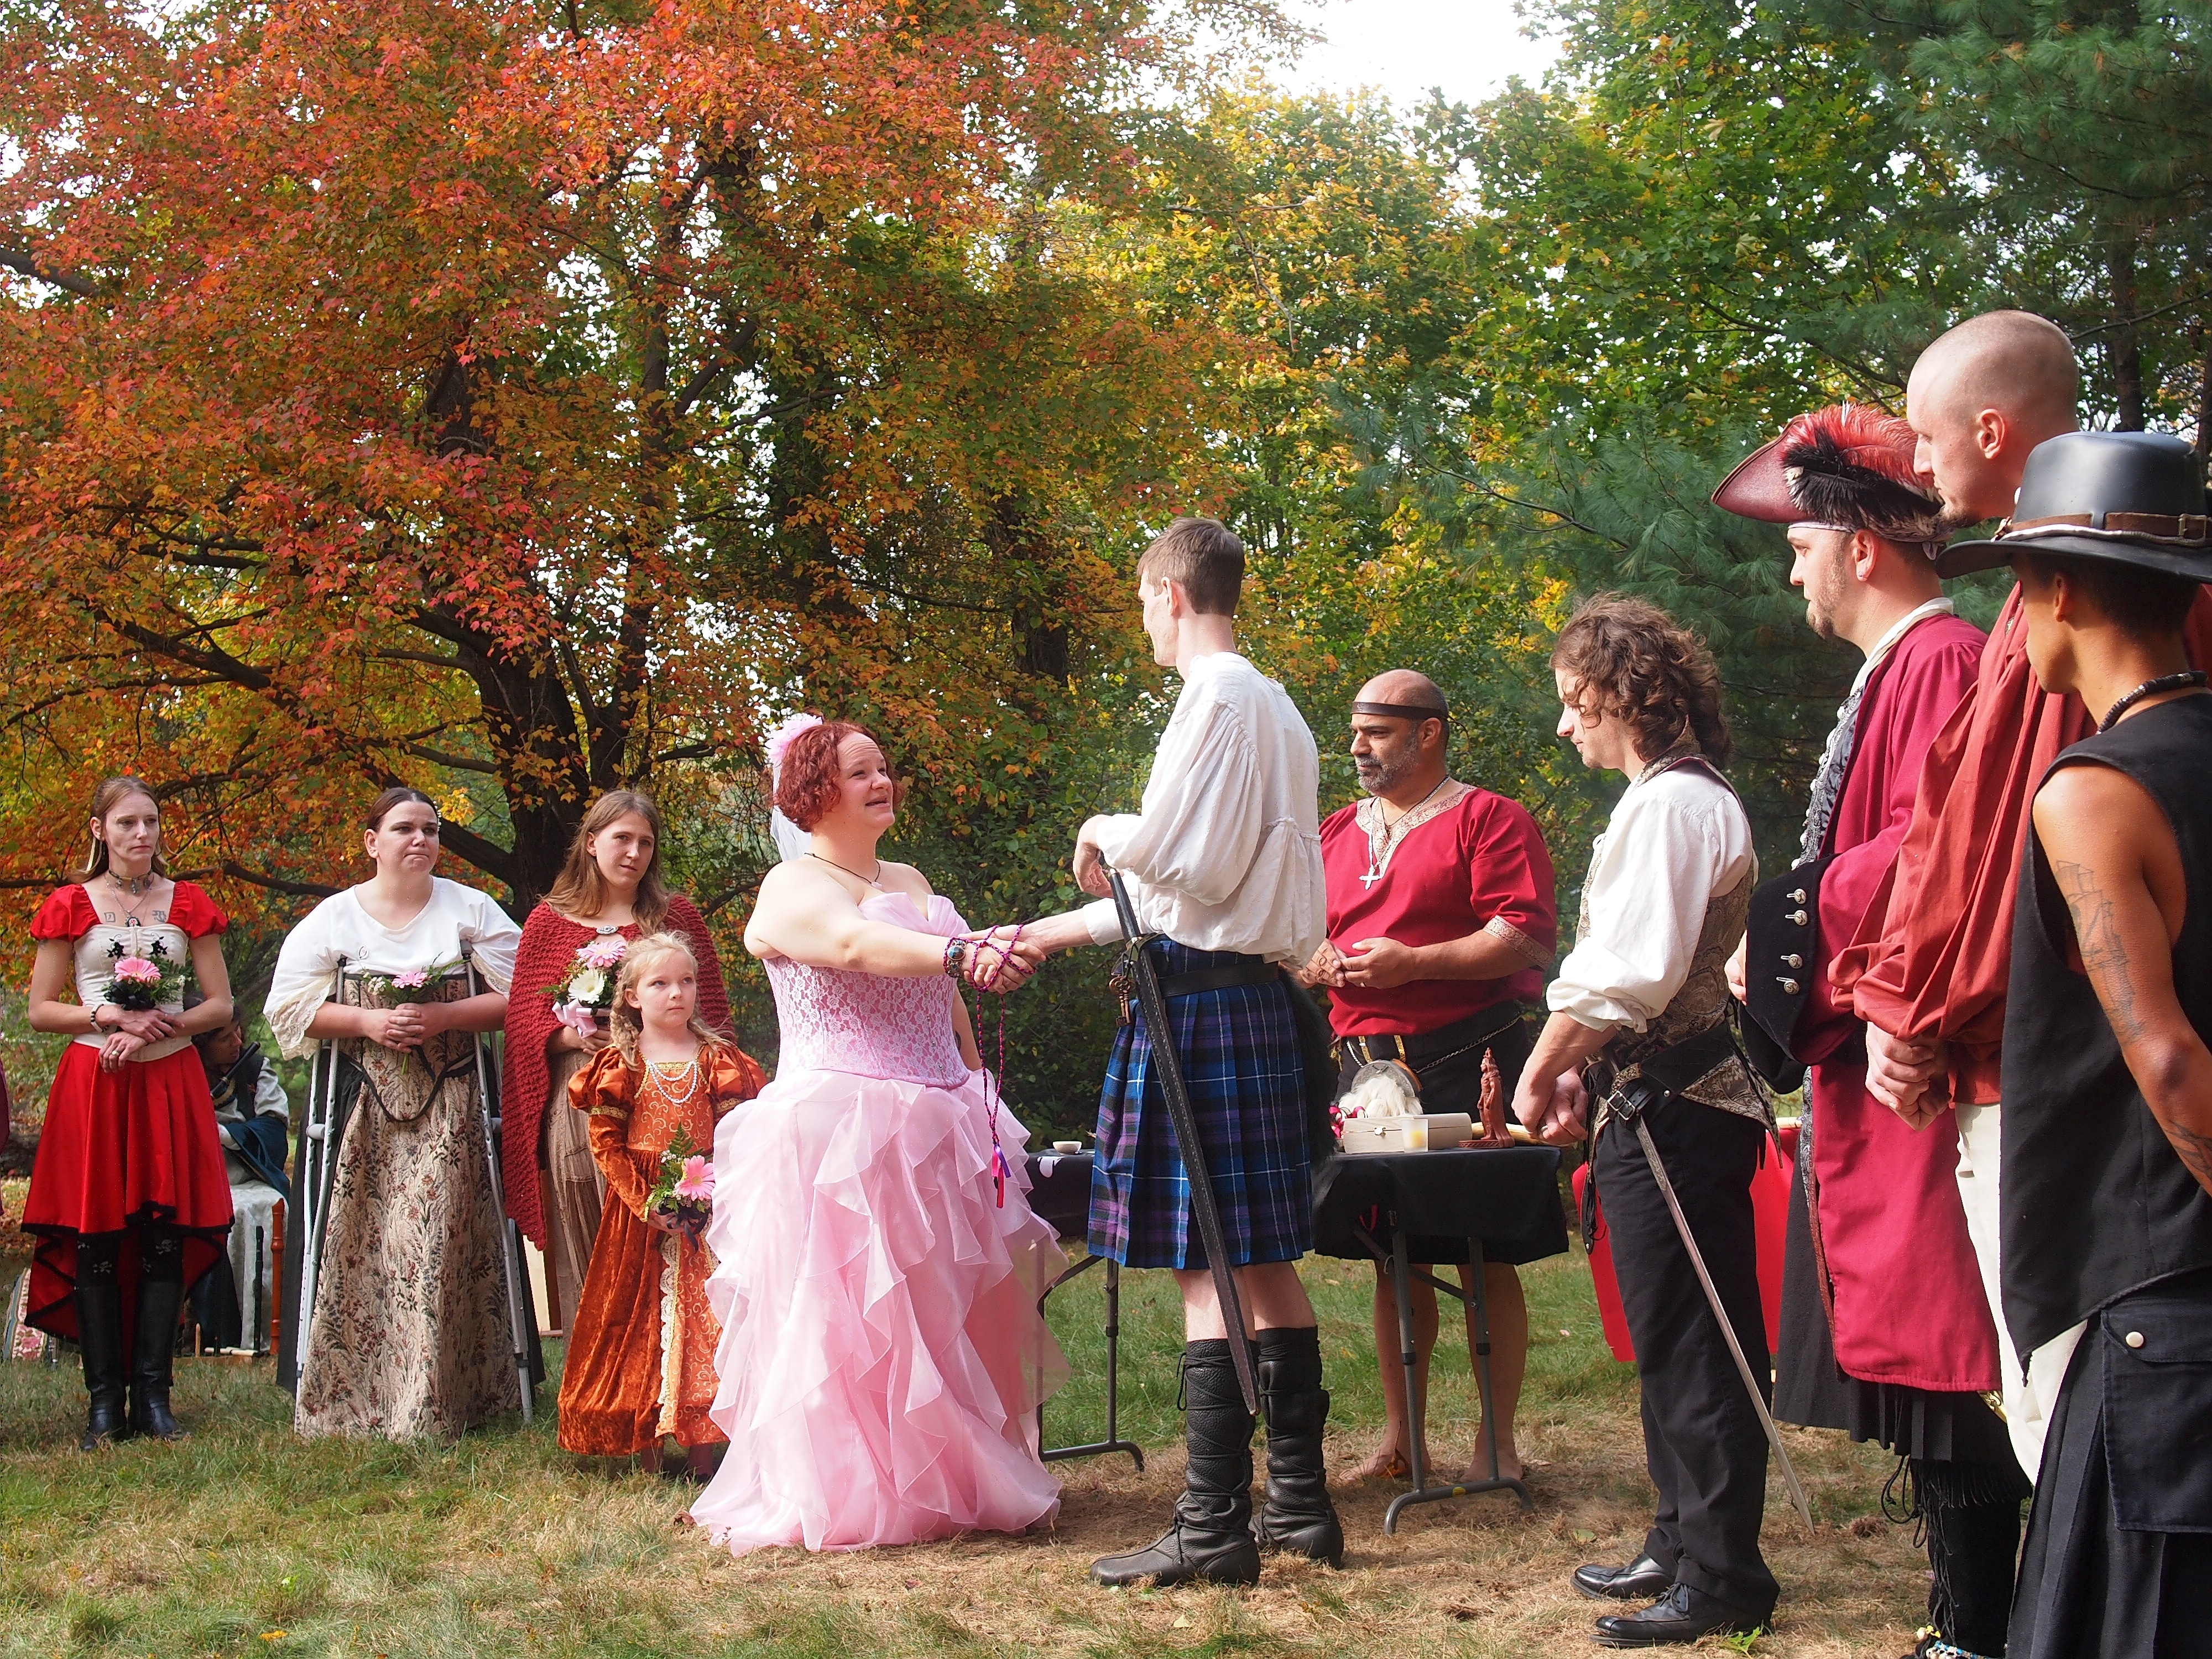 The hand fasting ceremony #9